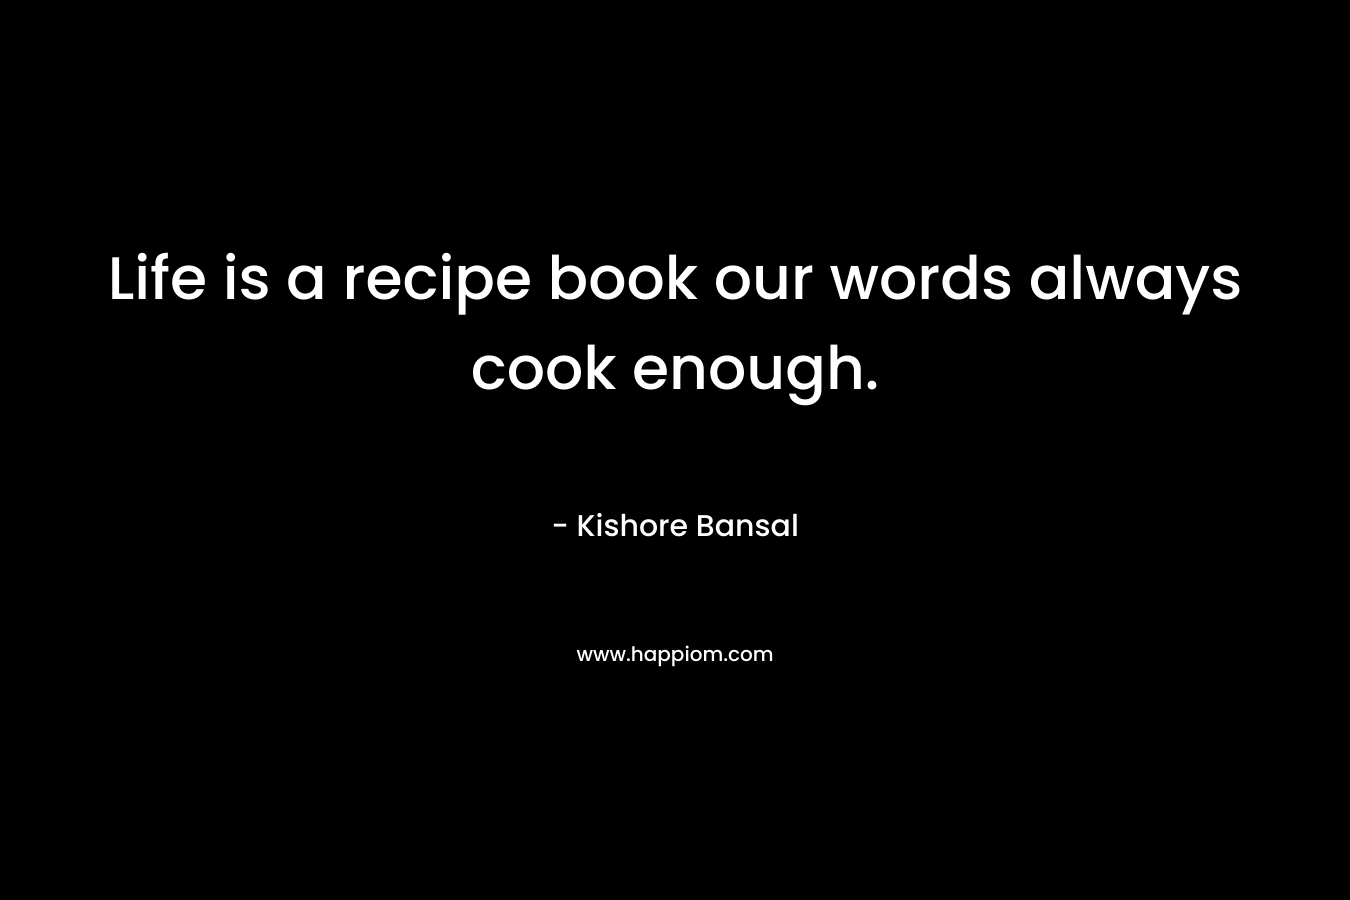 Life is a recipe book our words always cook enough.